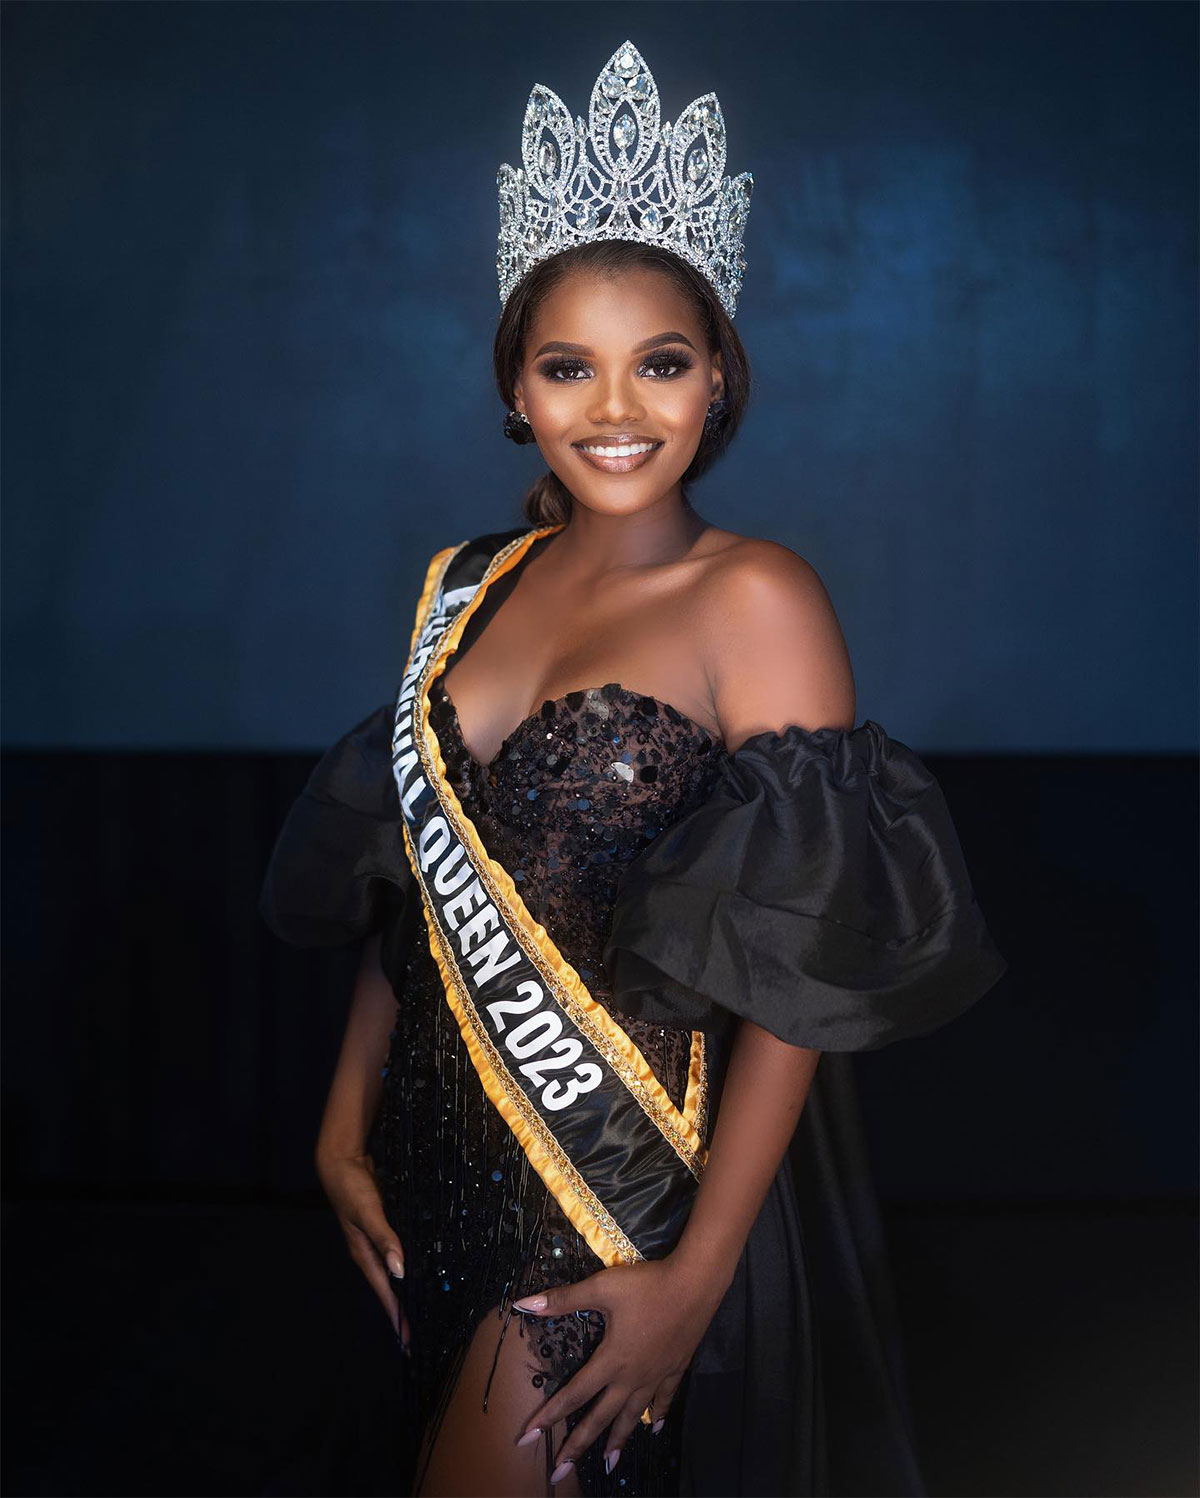 Shanice Butcher, Miss Caribbean Galaxy Real Estate, wearing her crown.